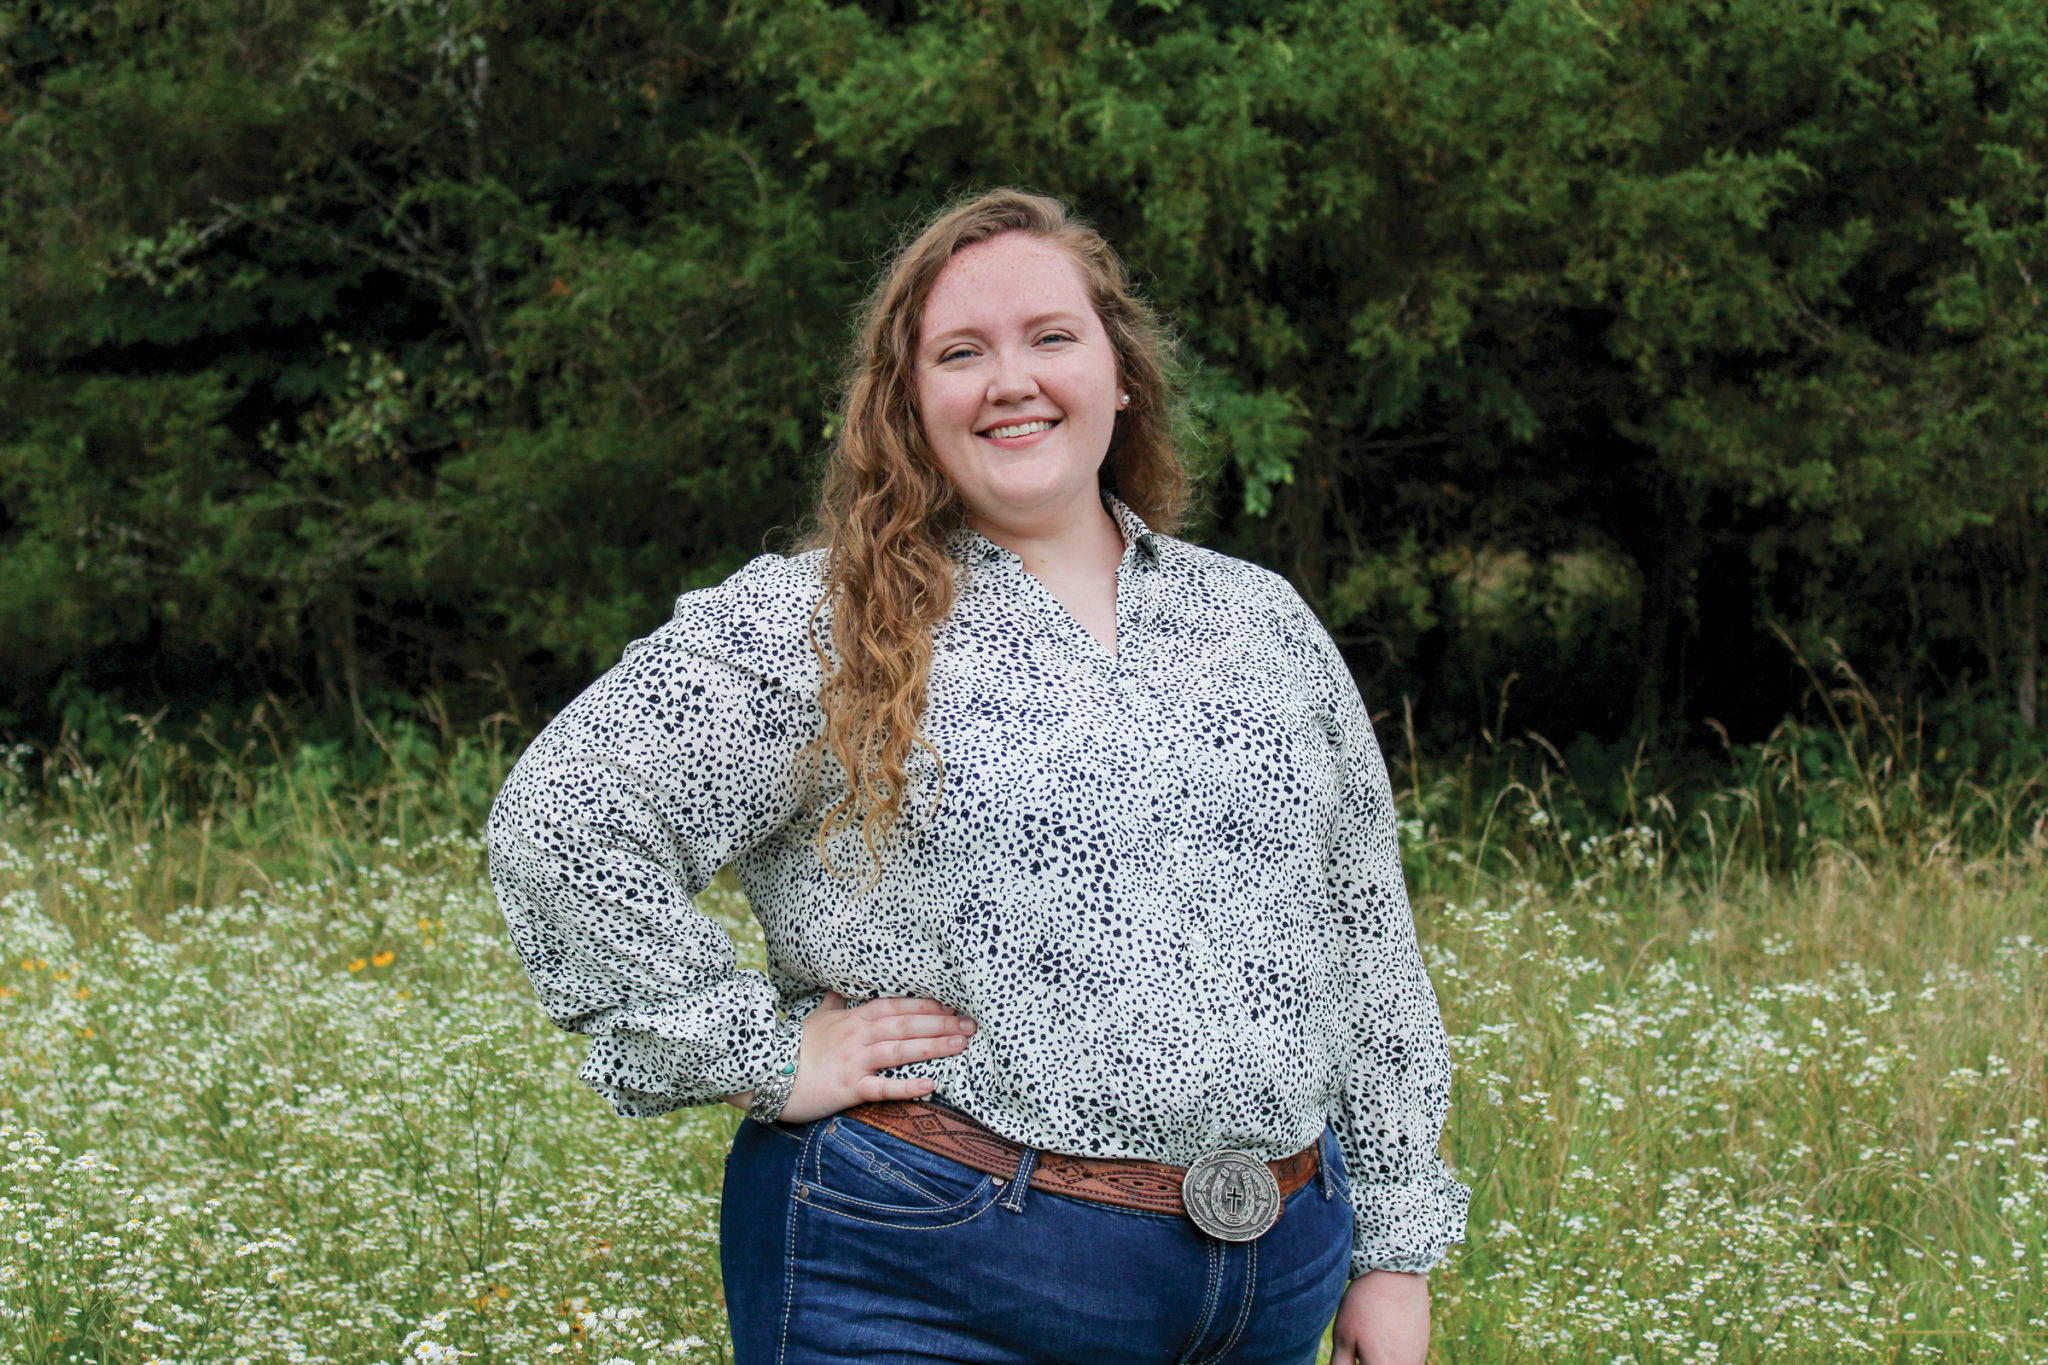 A young woman dressed in denim jeans and a floral shirt stands in front of evergreen trees in an overgrown meadow